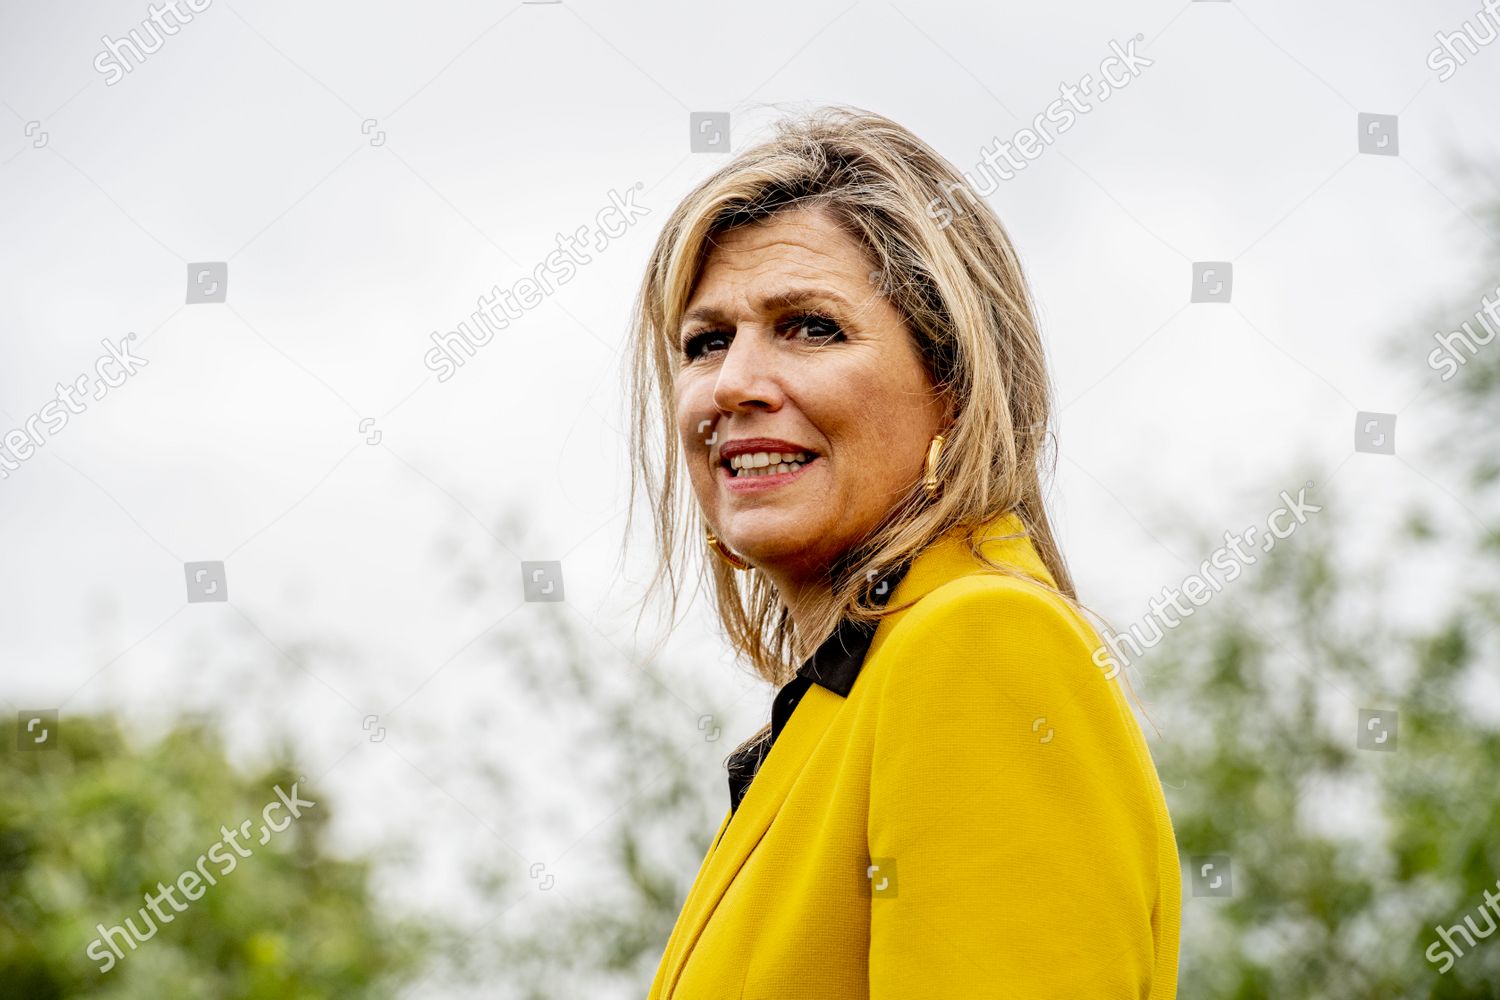 queen-maxima-visit-to-oostkapelle-netherlands-shutterstock-editorial-10705337at.jpg